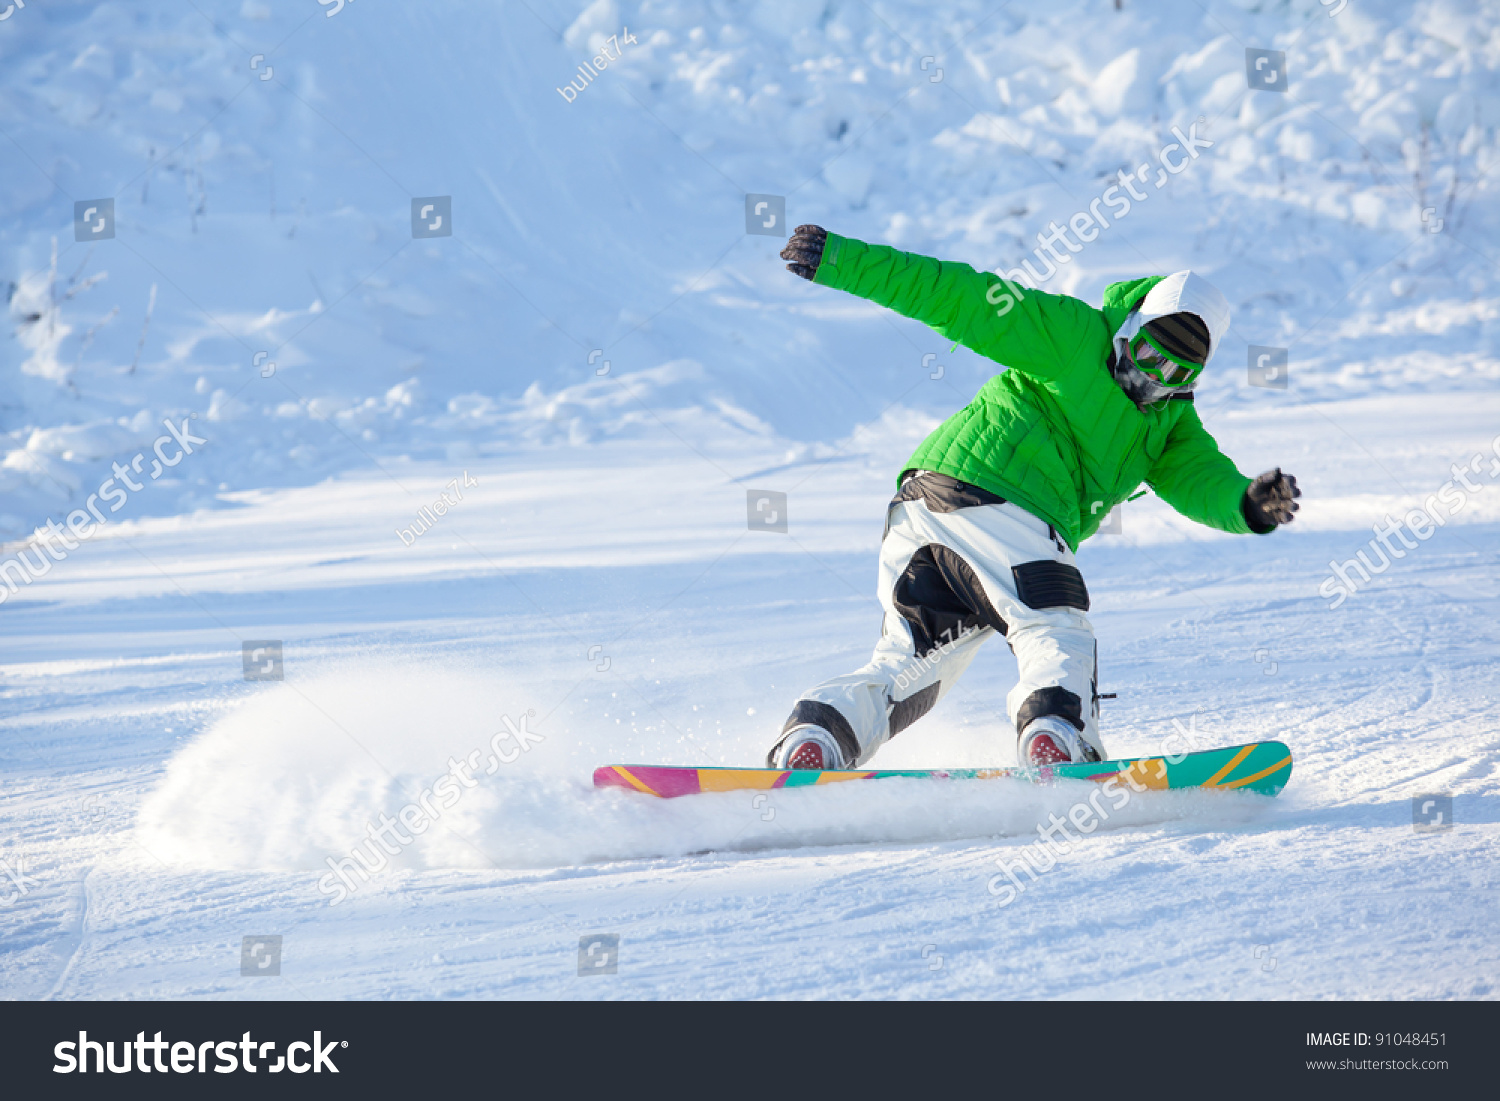 Colorful Image Young Snowboarder Green Jacket Stock Photo Edit Now